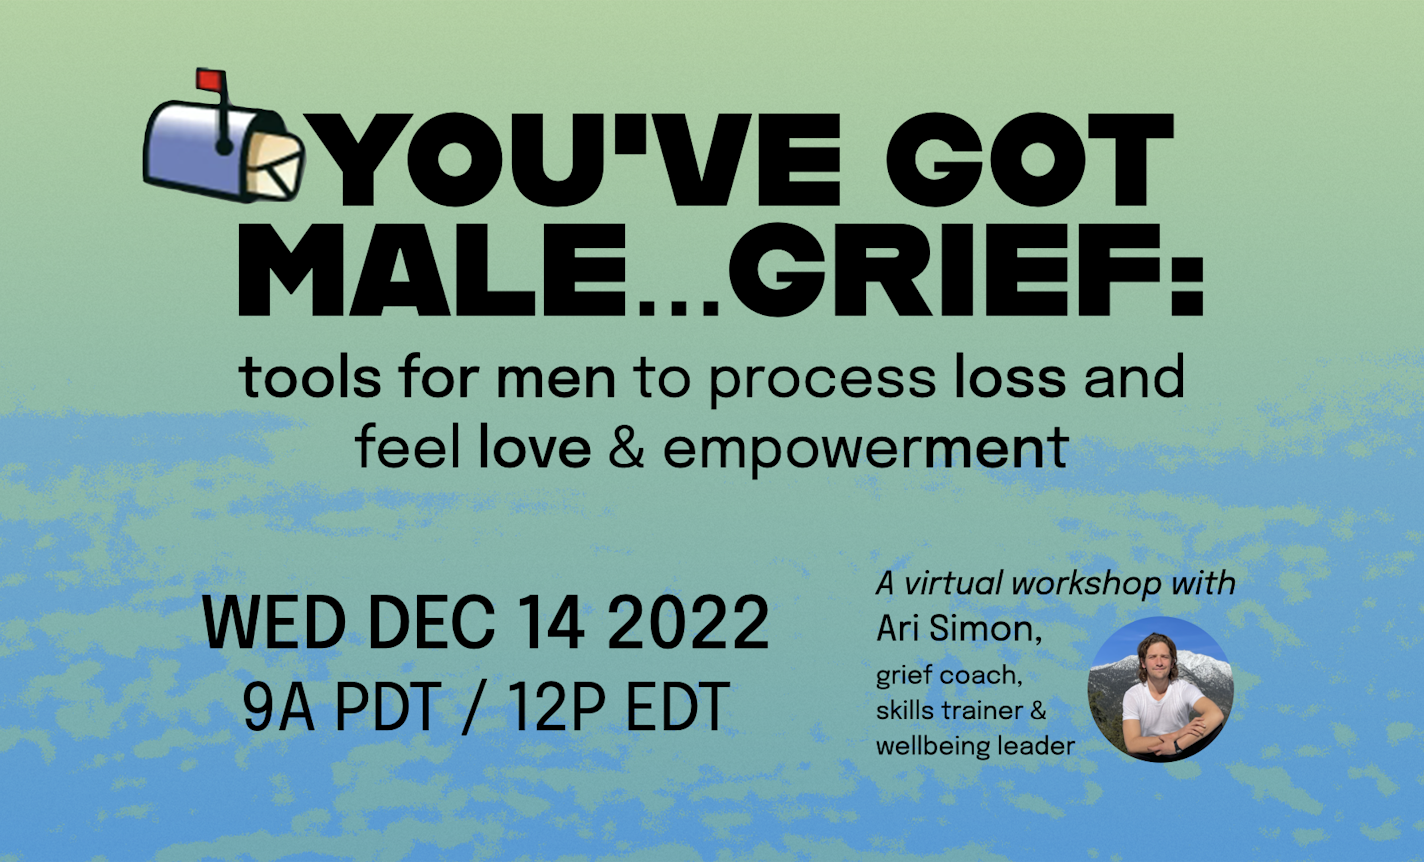 You've Got Male Grief: Tools for Loss, Love & Empowerment